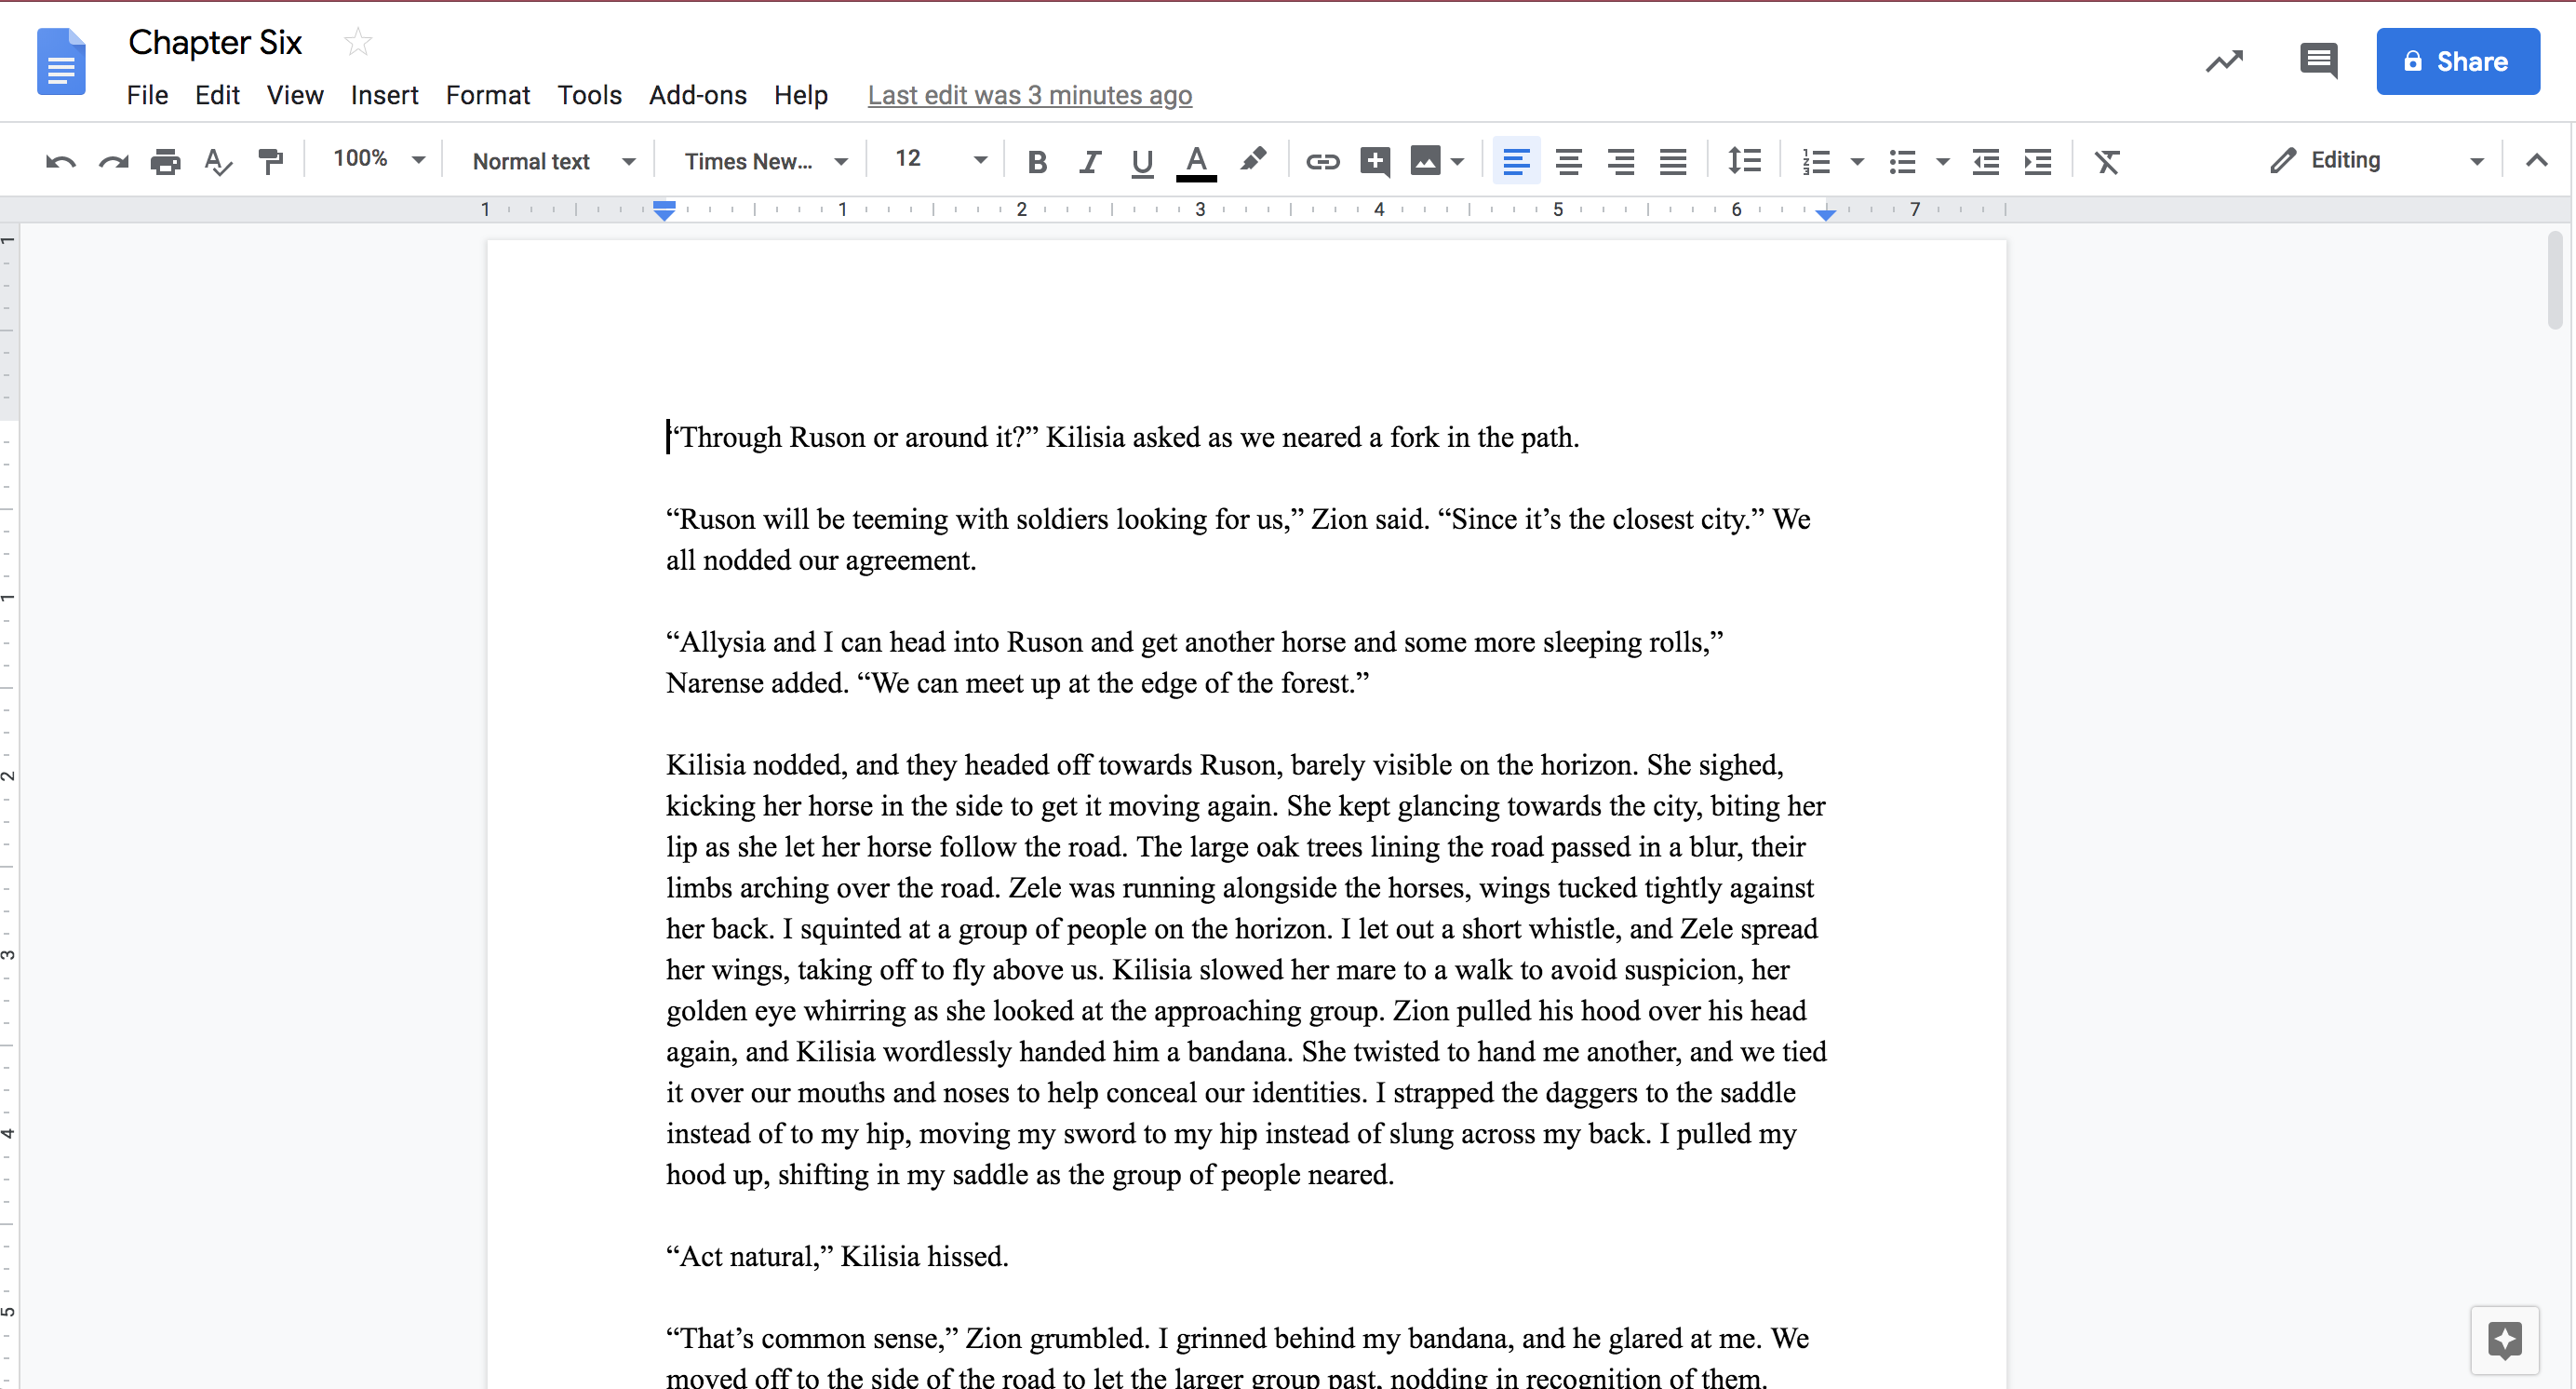 A screenshot of the document I am writing chapter 6 in